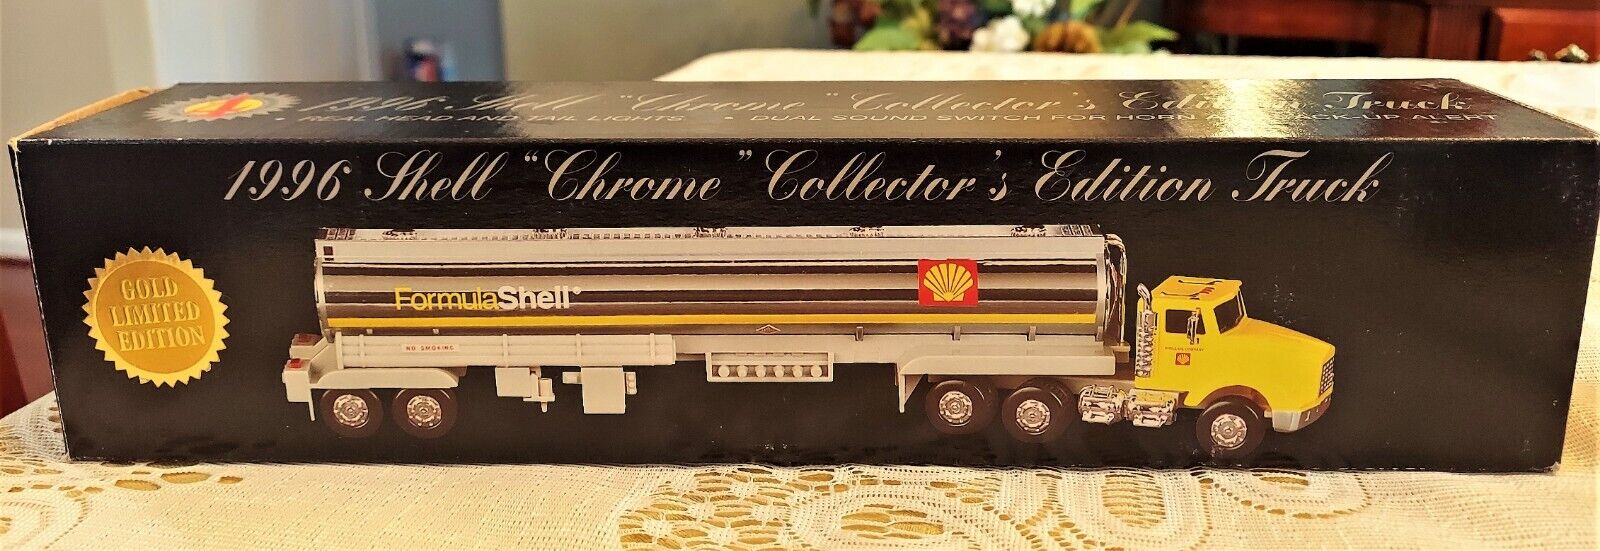 1996 Shell Chrome Collector\'s Editiion Truck Lights and Sounds NEW